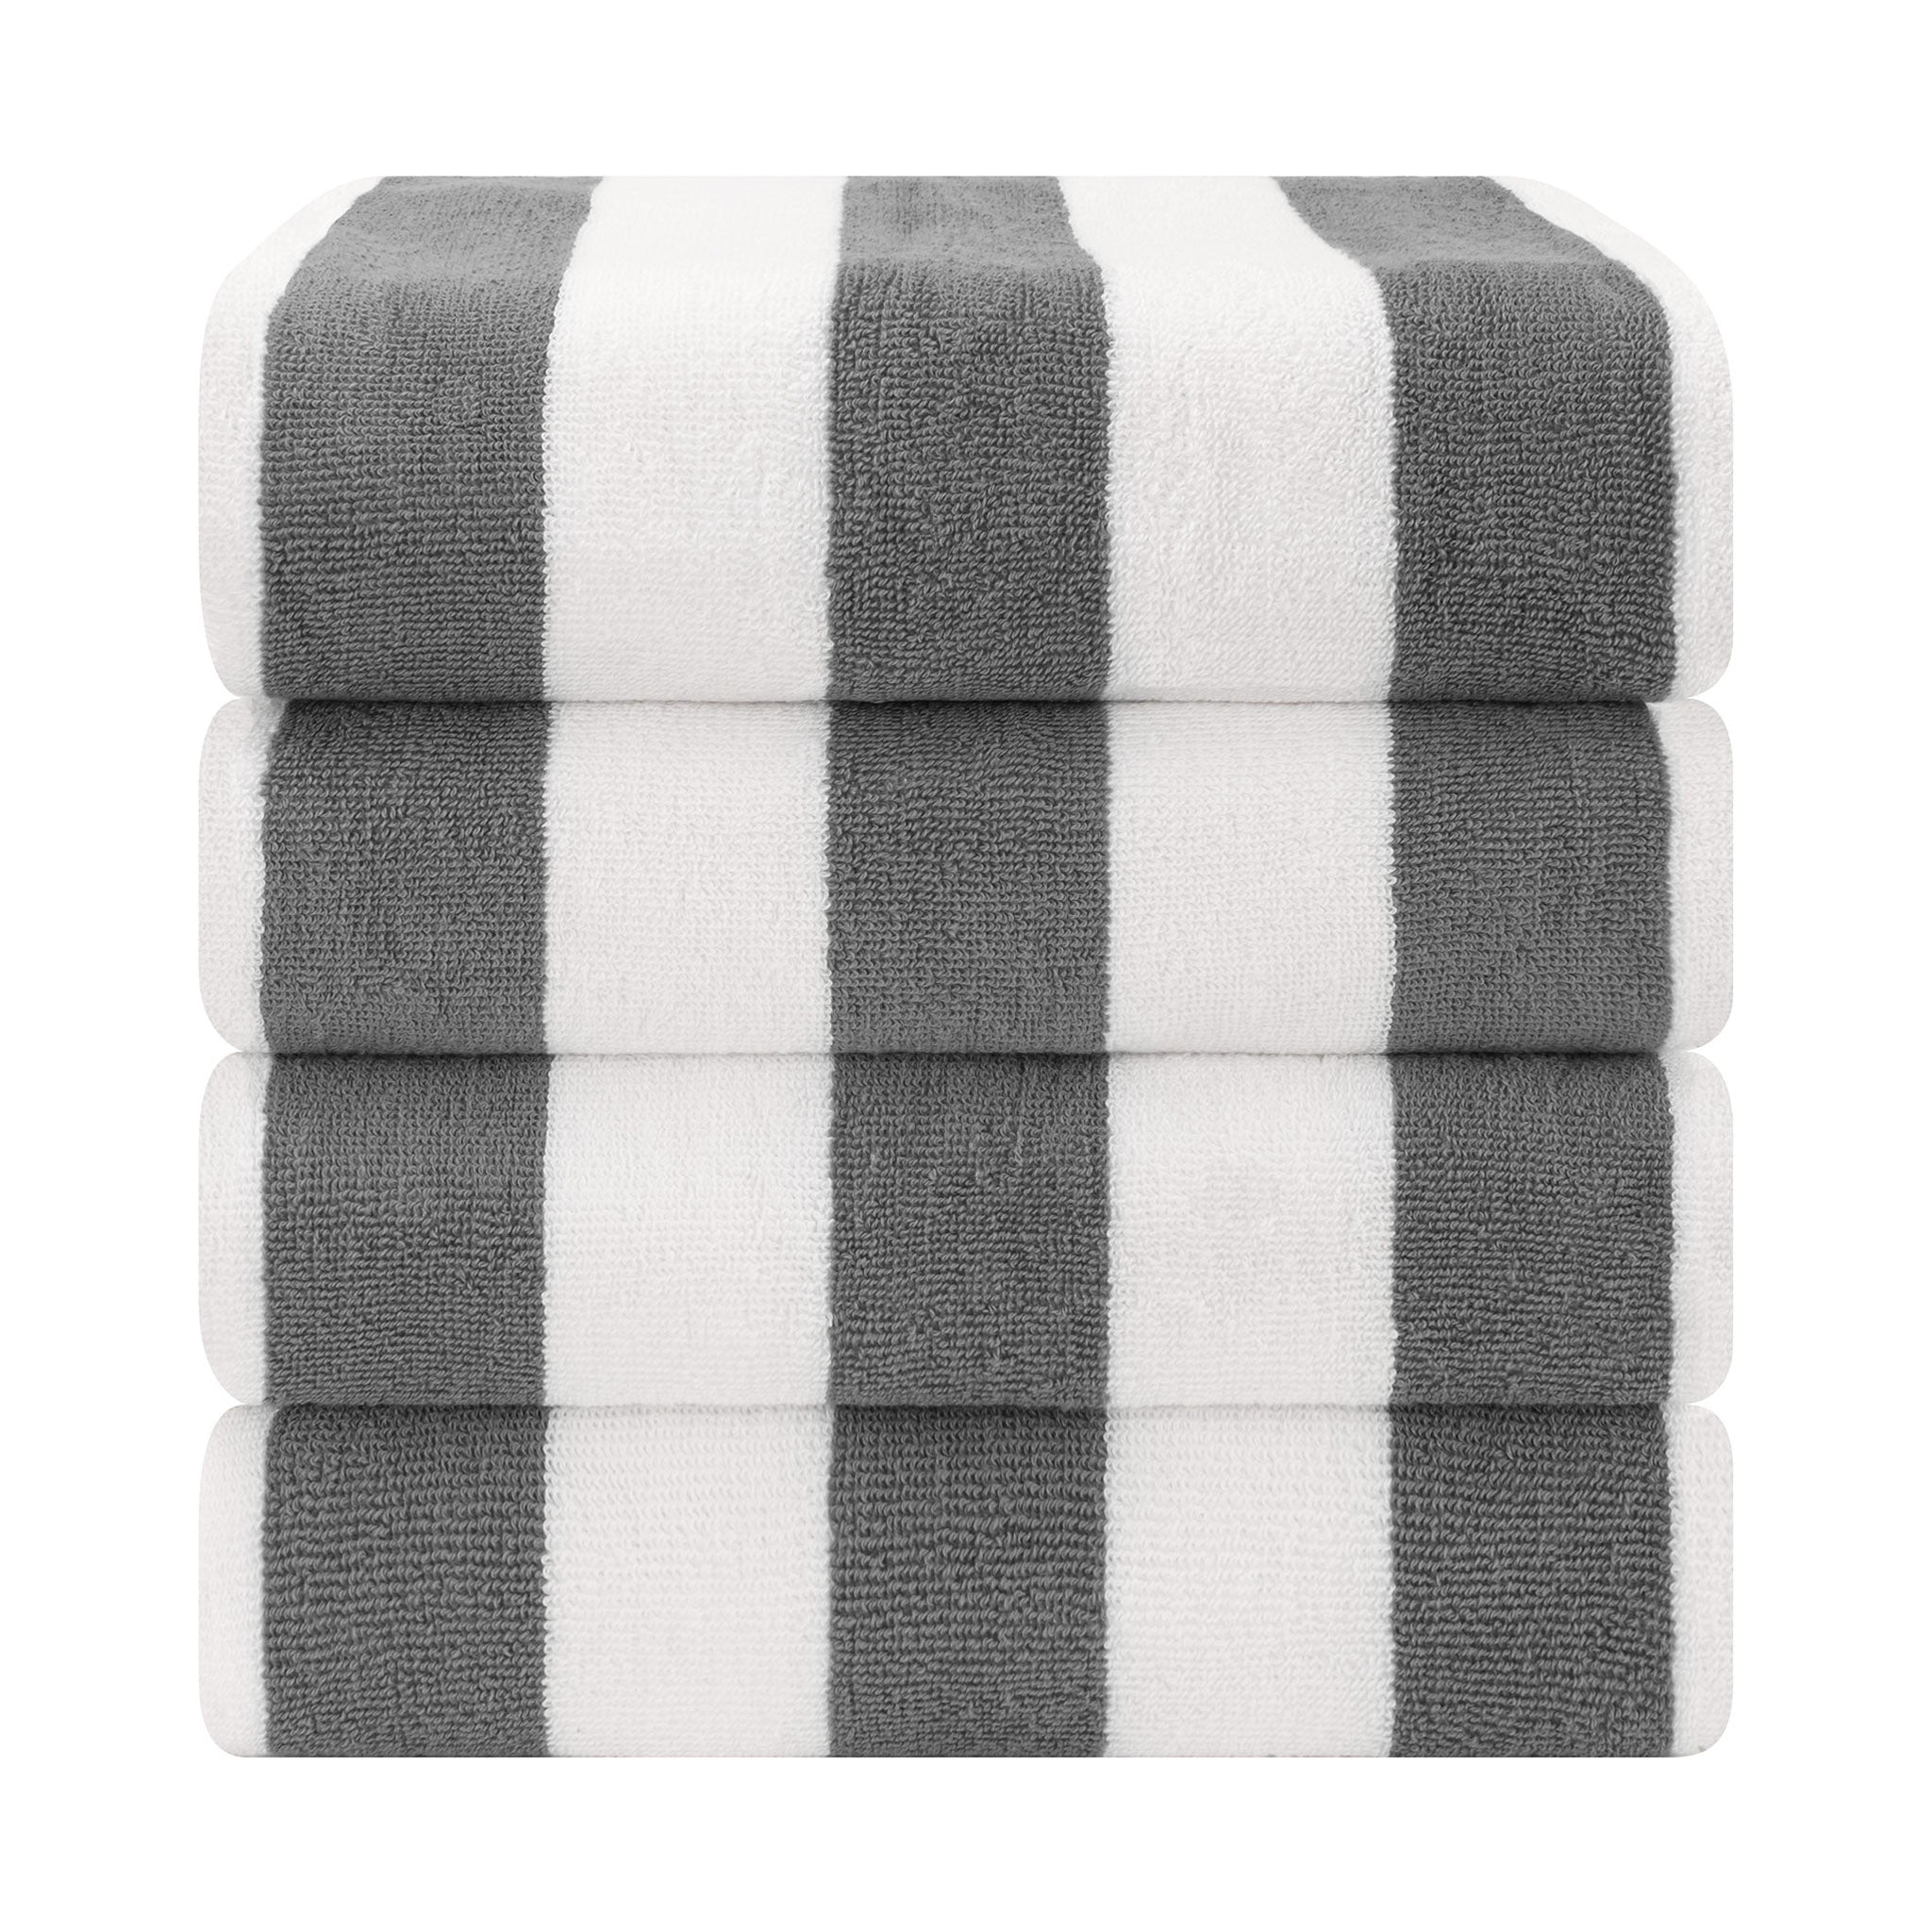 American Soft Linen 100% Cotton 4 Pack Beach Towels Cabana Striped Pool Towels -gray-2